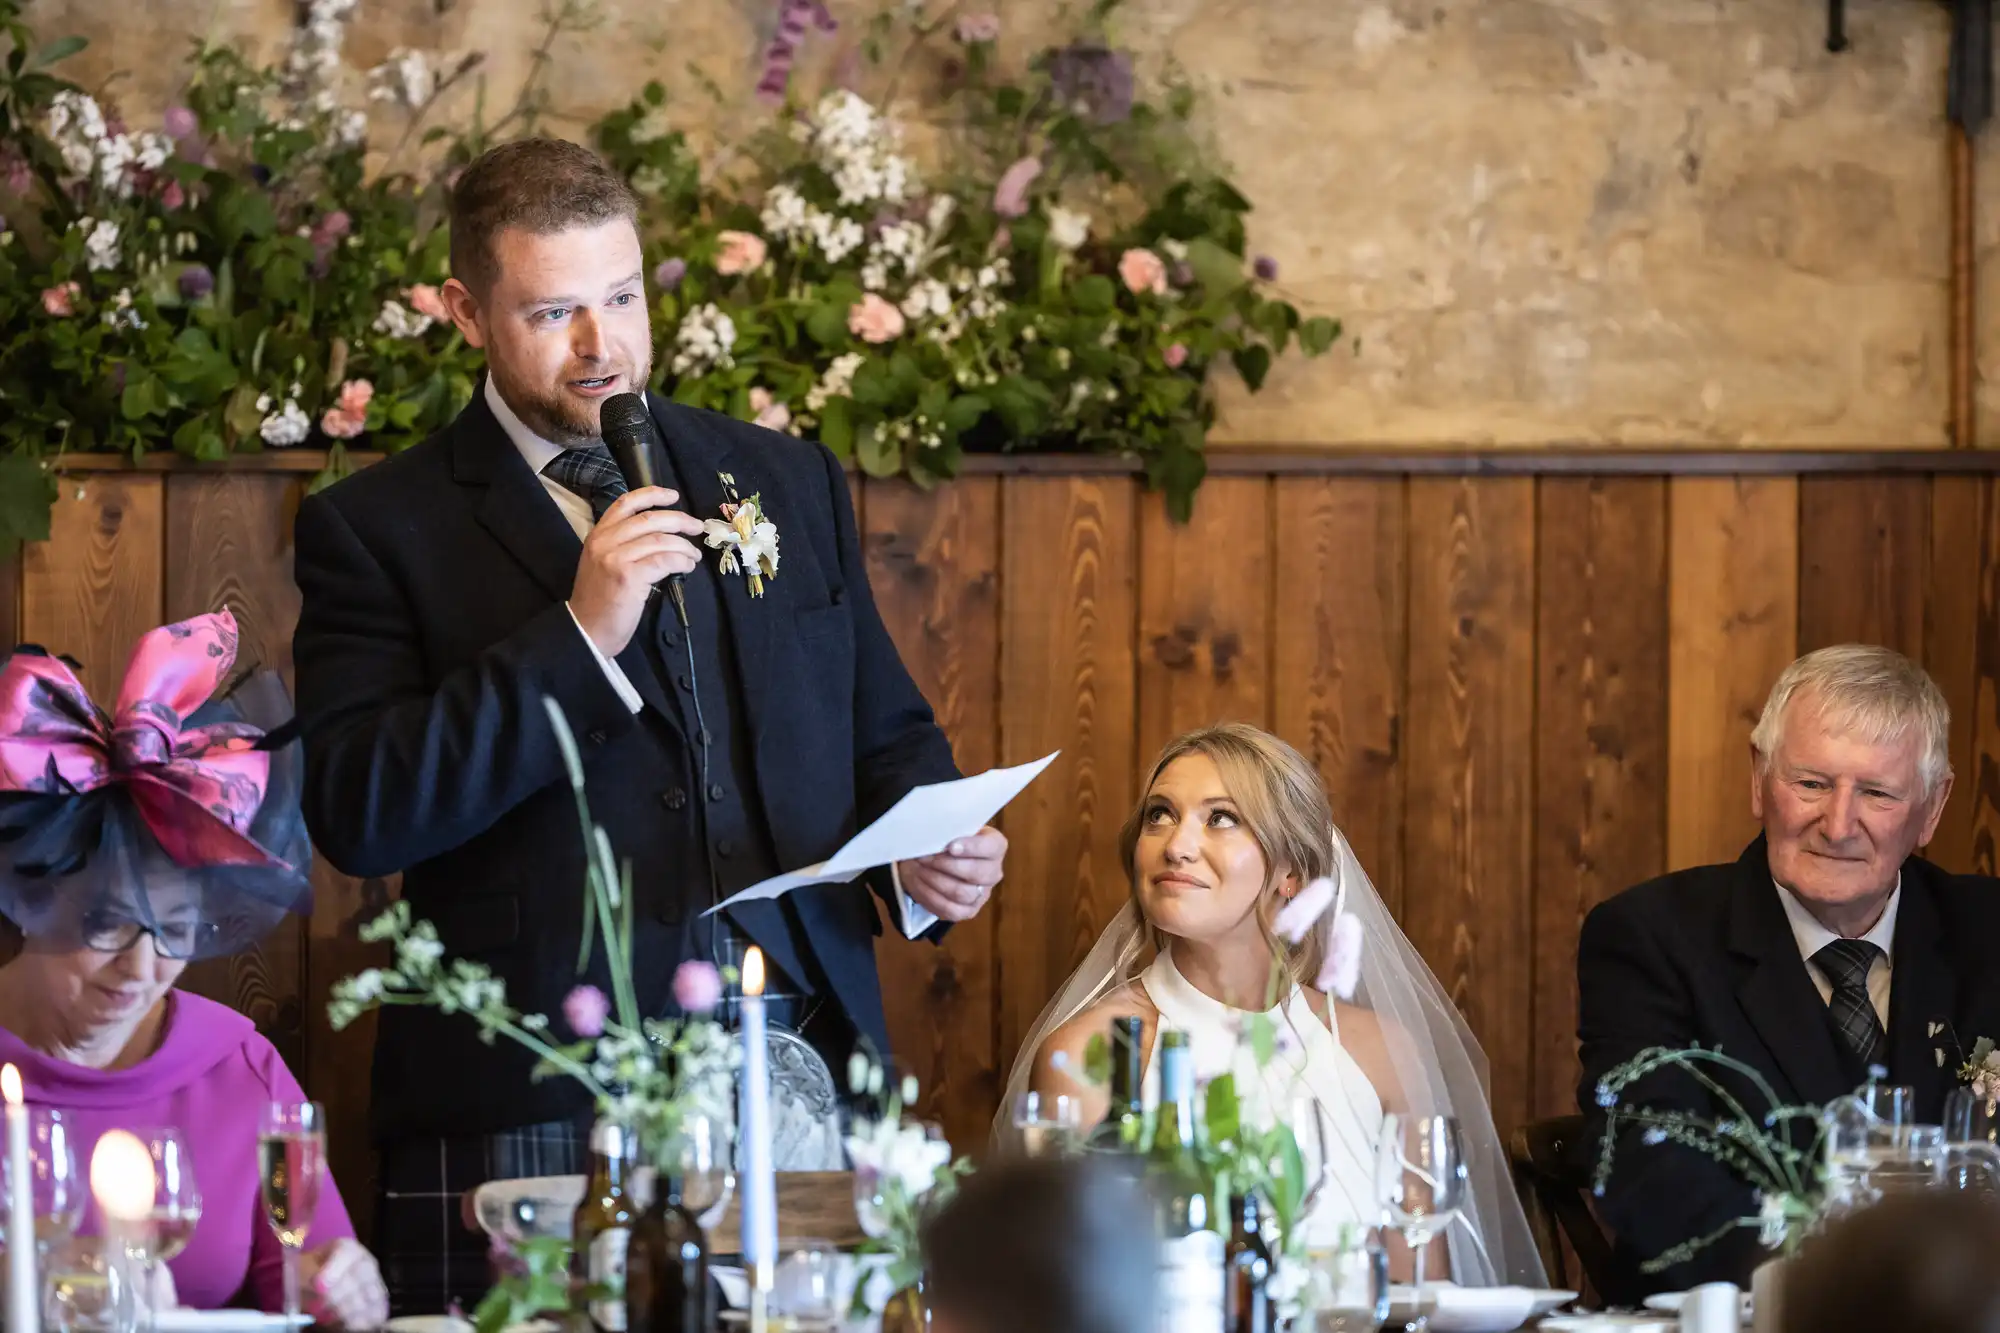 Man giving a speech at a wedding reception with a bride listening intently and other guests around a decorated table.